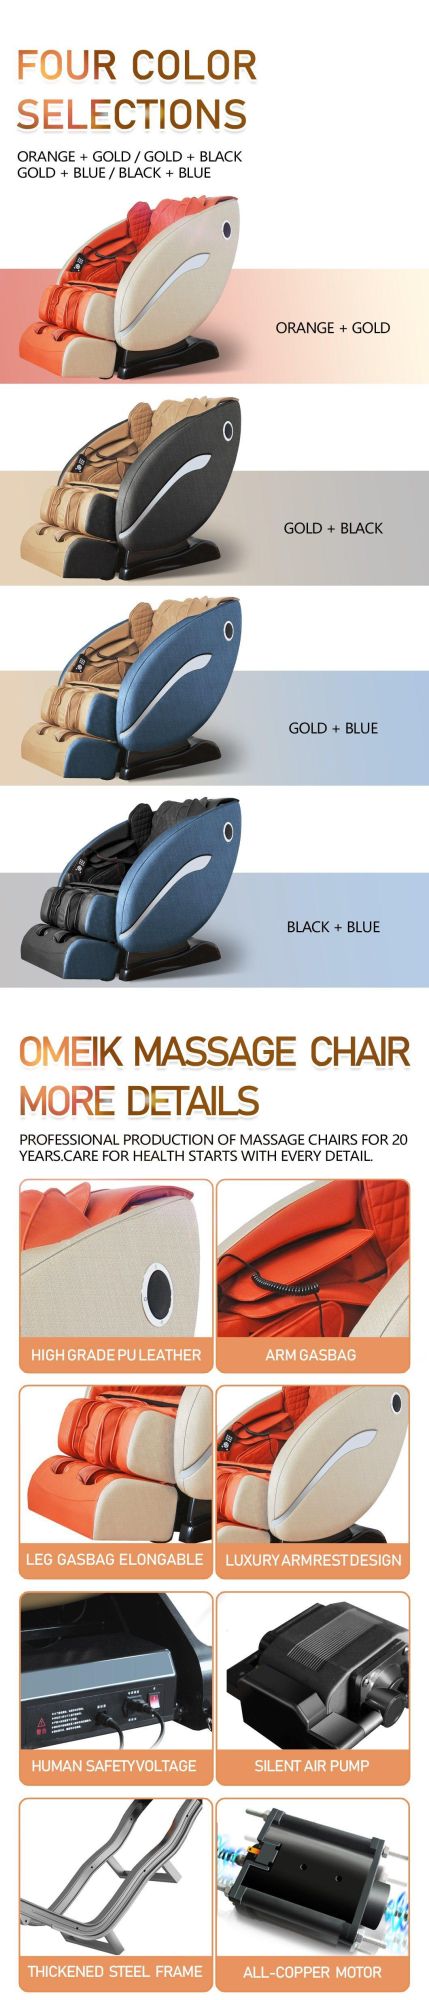 High Quality Full Body Relaxing Back Heating Therapy Zero Gravity Massage Chair